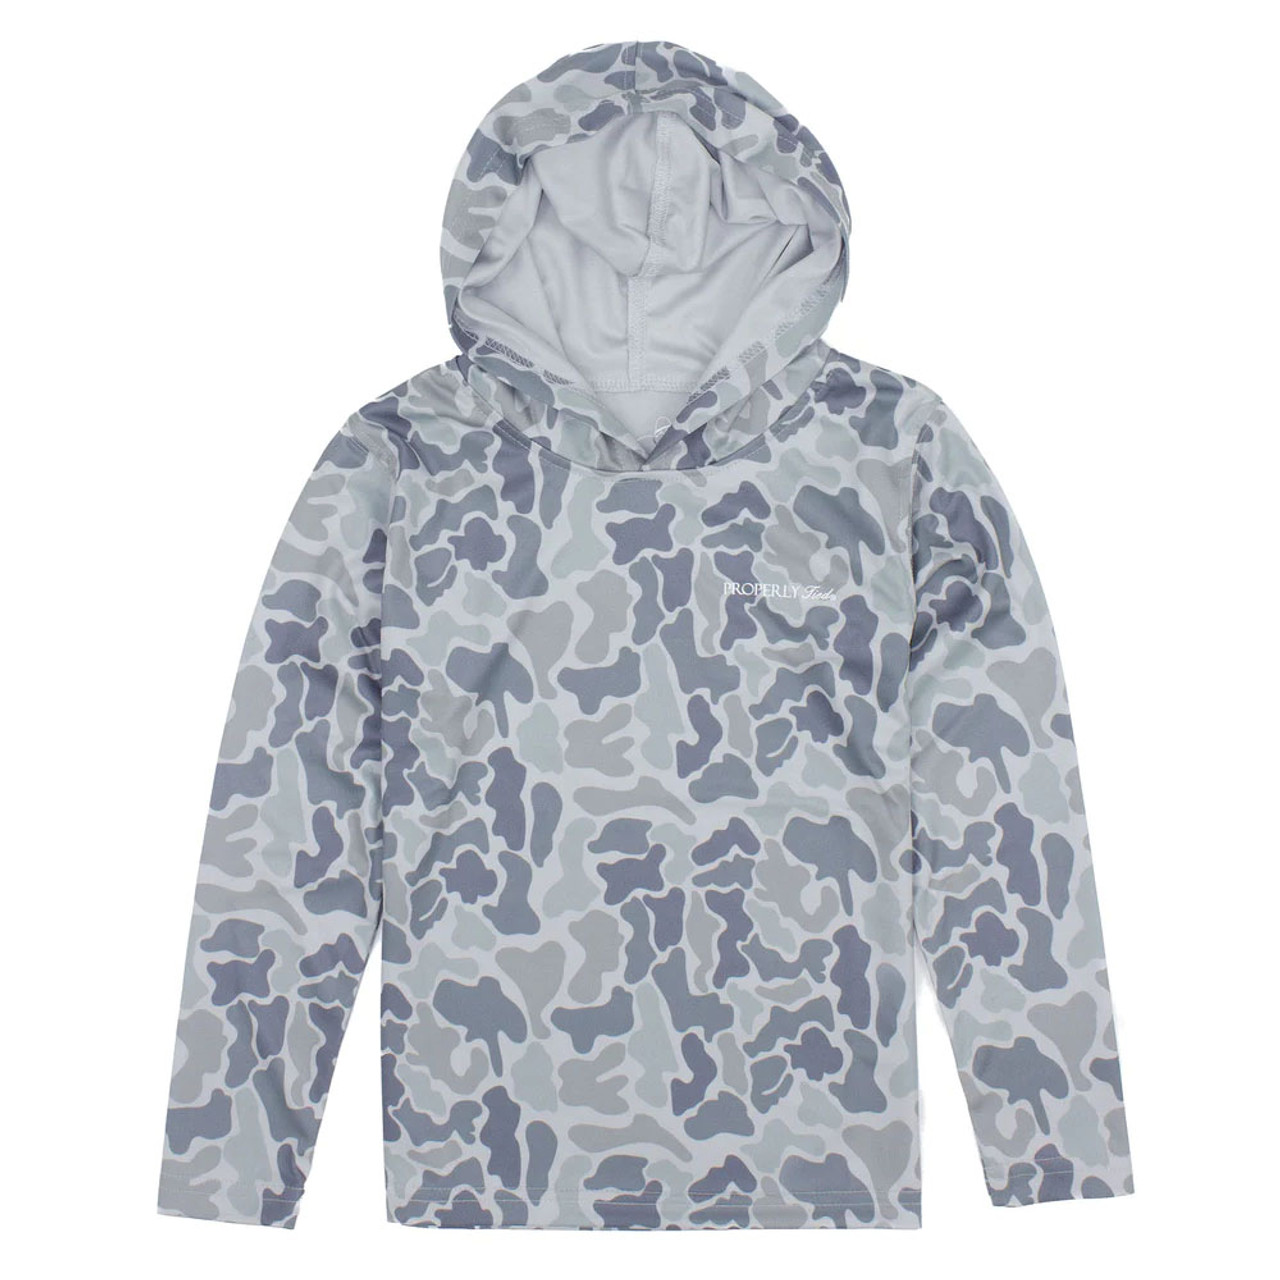 Boys' Properly Tied Sportsman Hoodie | Eagle Eye Outfitters